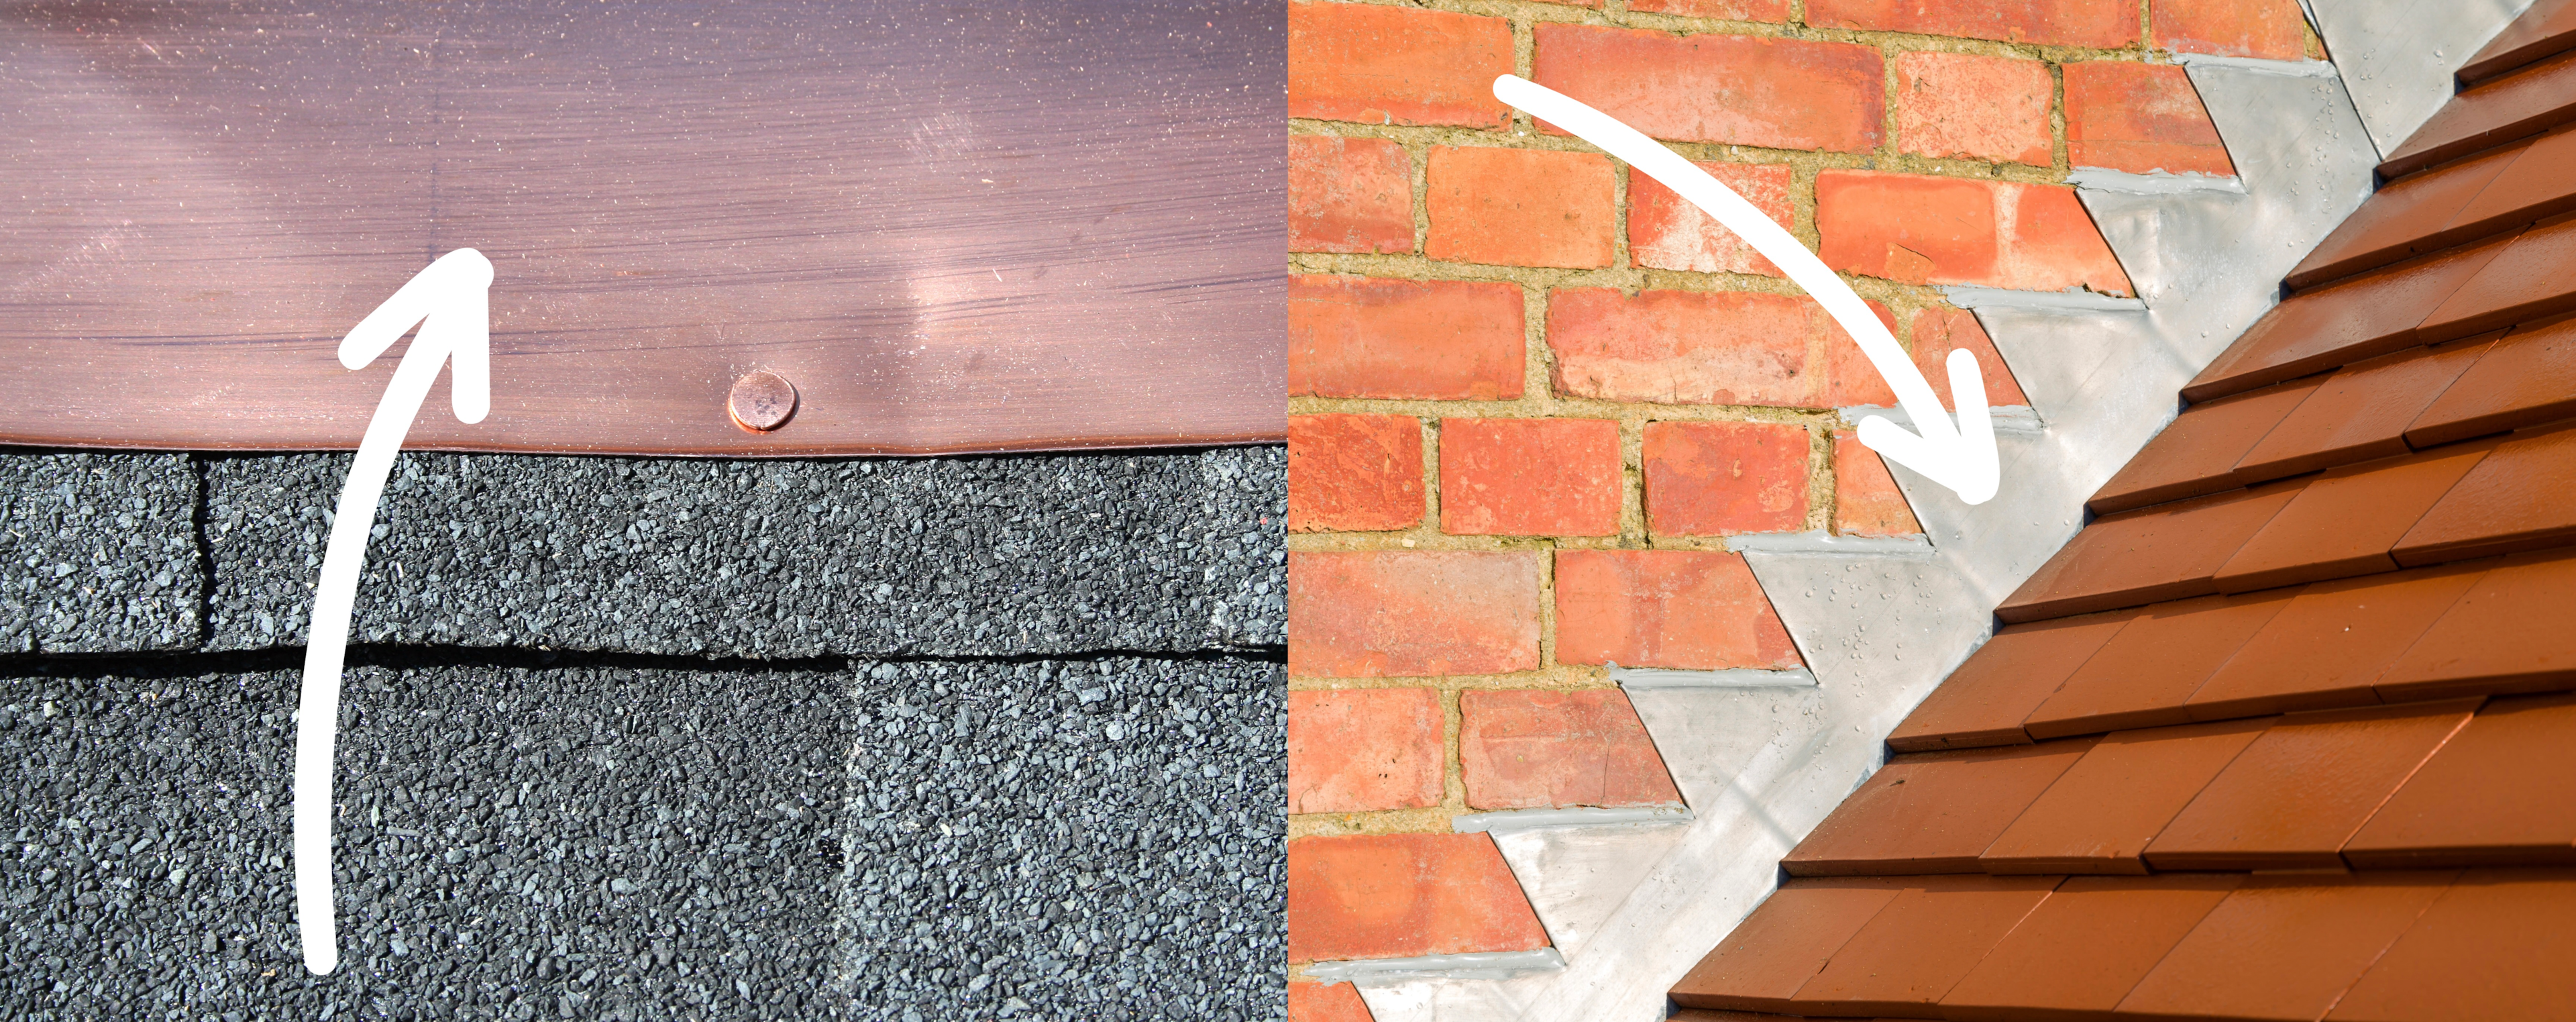 Examples of Roof Flashing